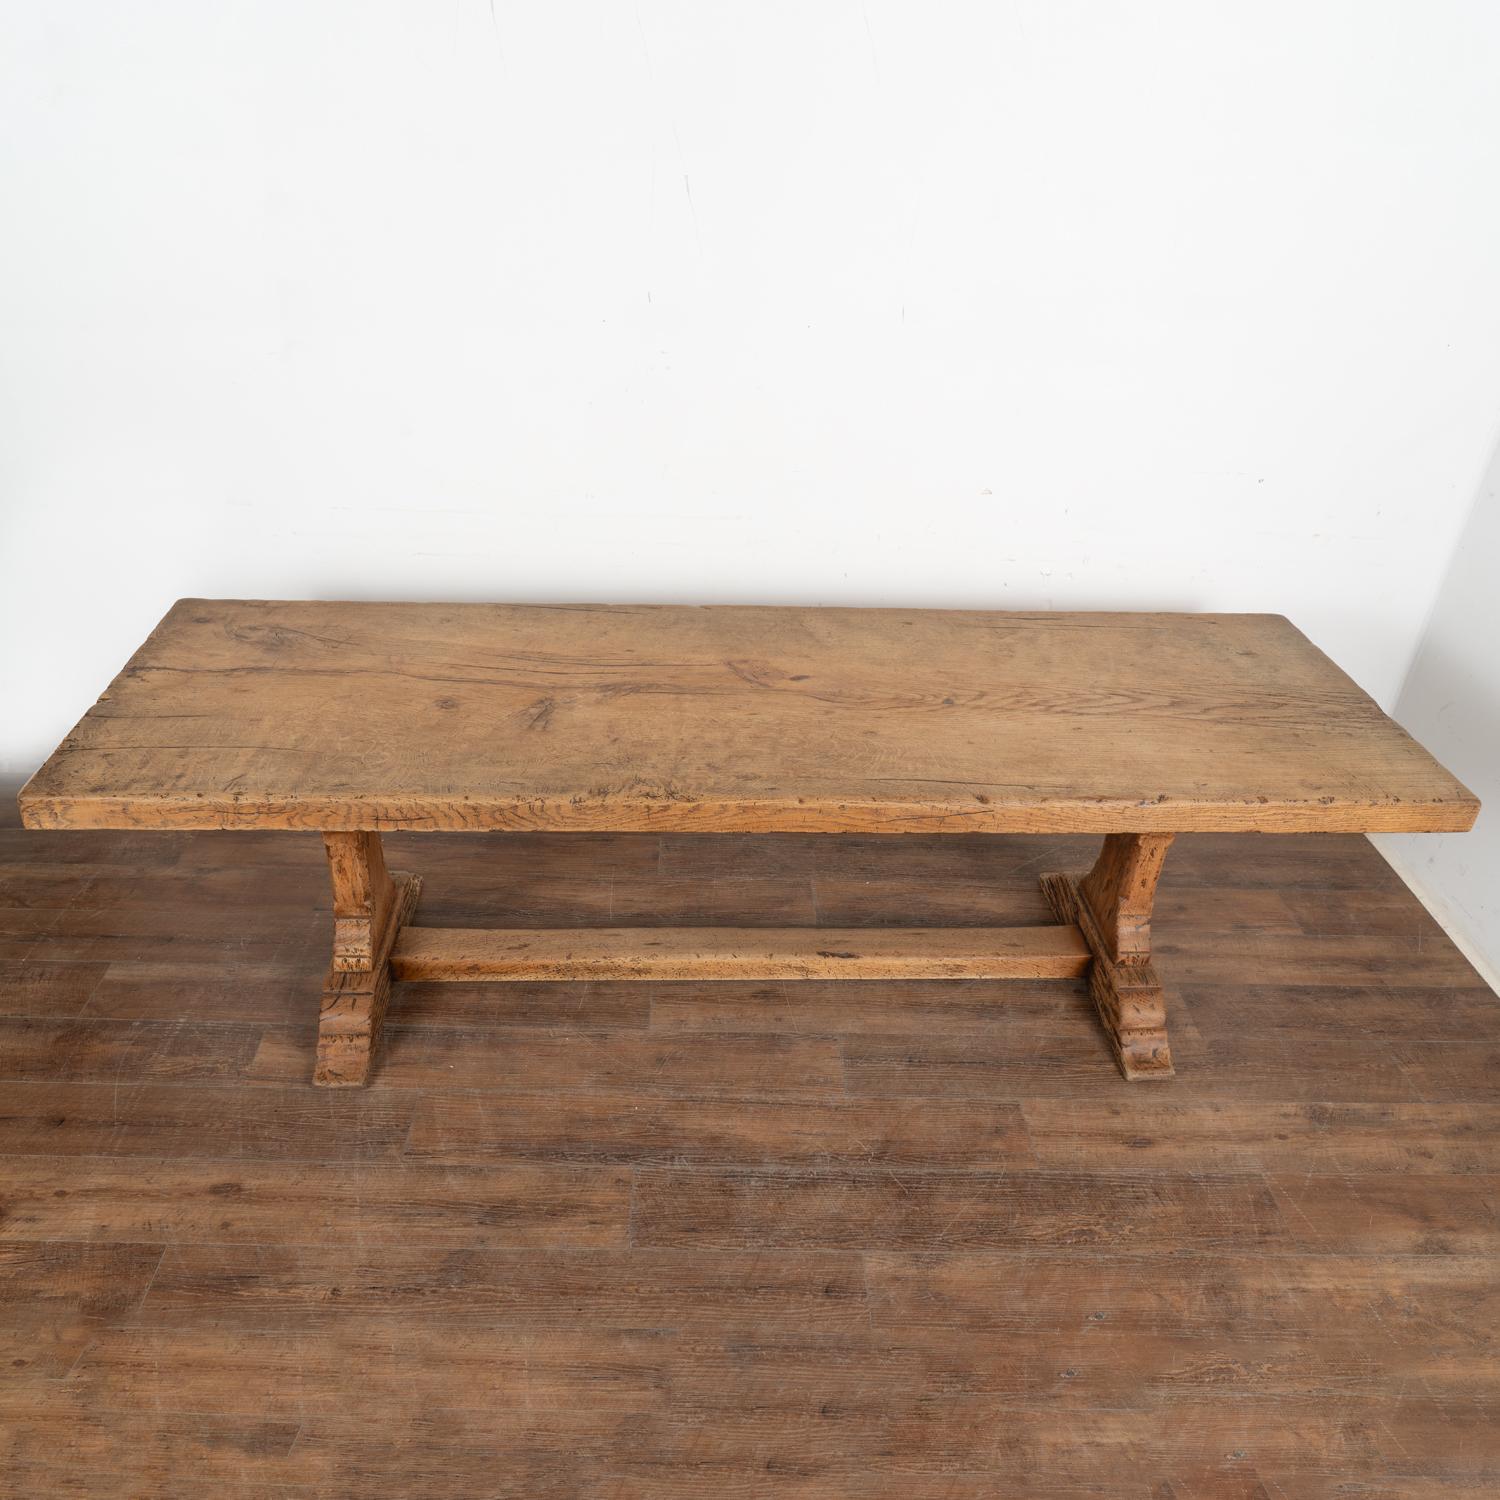 20th Century French Country Oak Dining Table, circa 1900-20 For Sale